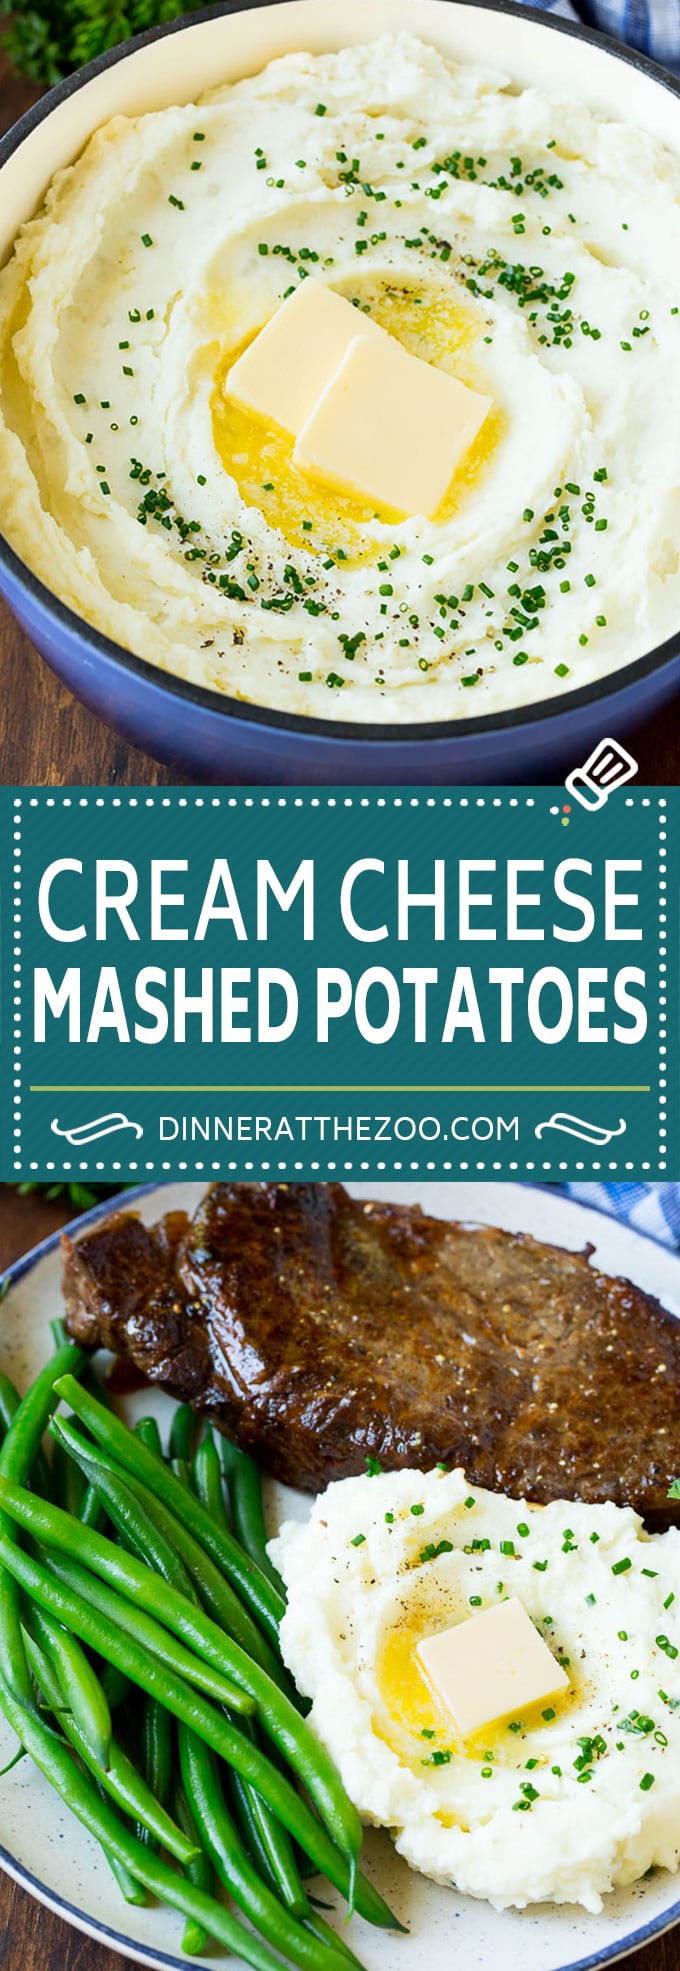 These cream cheese mashed potatoes are boiled potatoes blended with butter, milk, cream cheese and seasonings to make a rich and creamy side dish. 